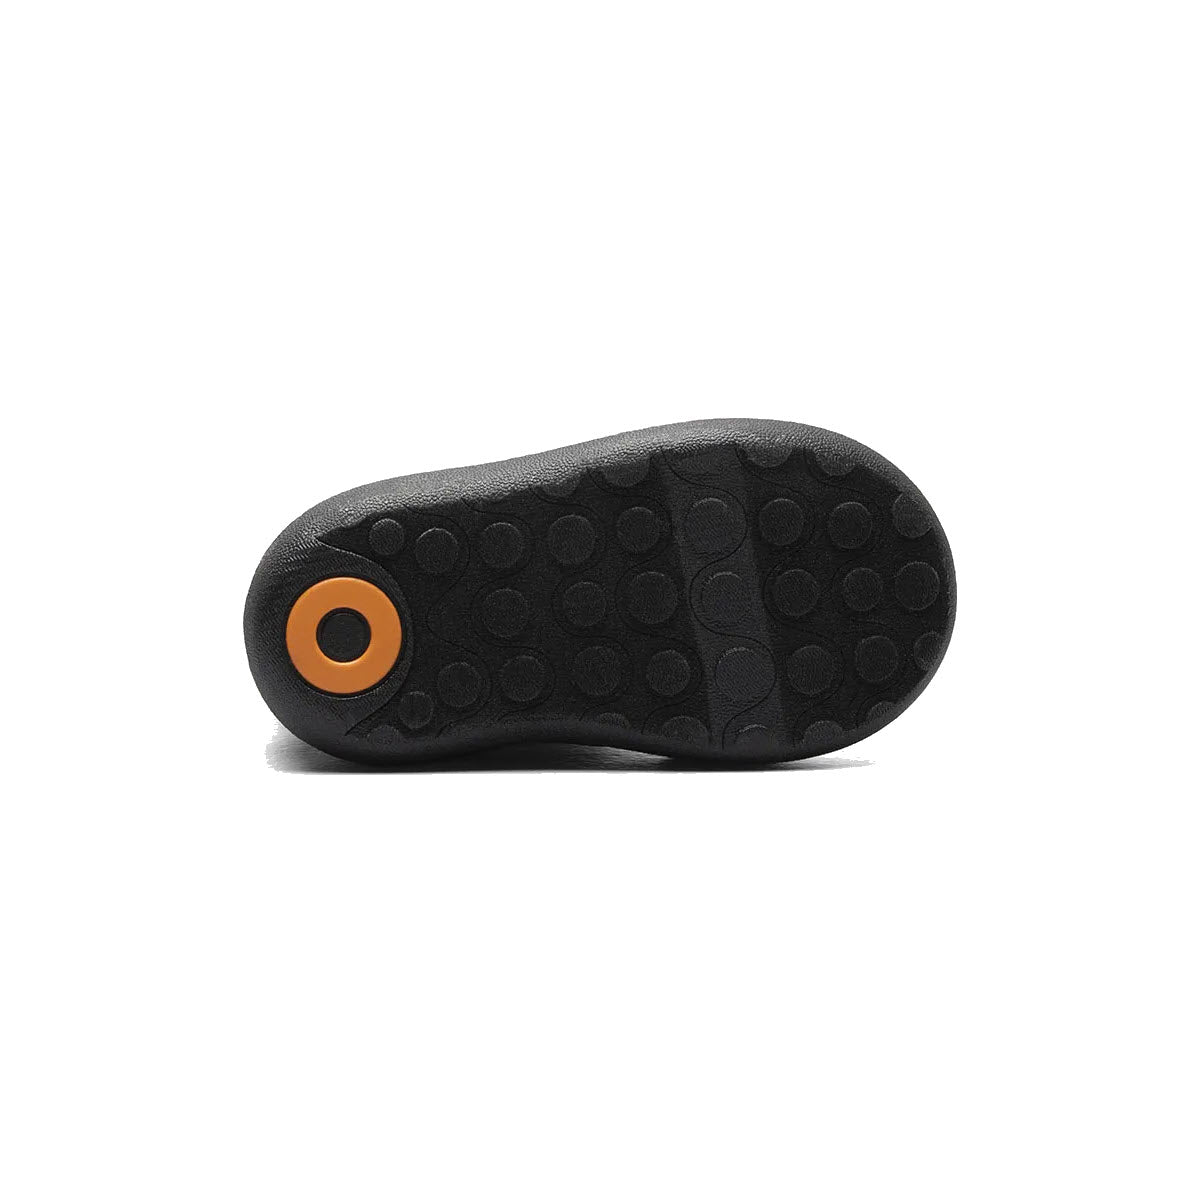 Black waterproof shoe sole with textured circular patterns and a single orange circle near the heel of the Bogs Baby Classic Solid Black - Toddlers.